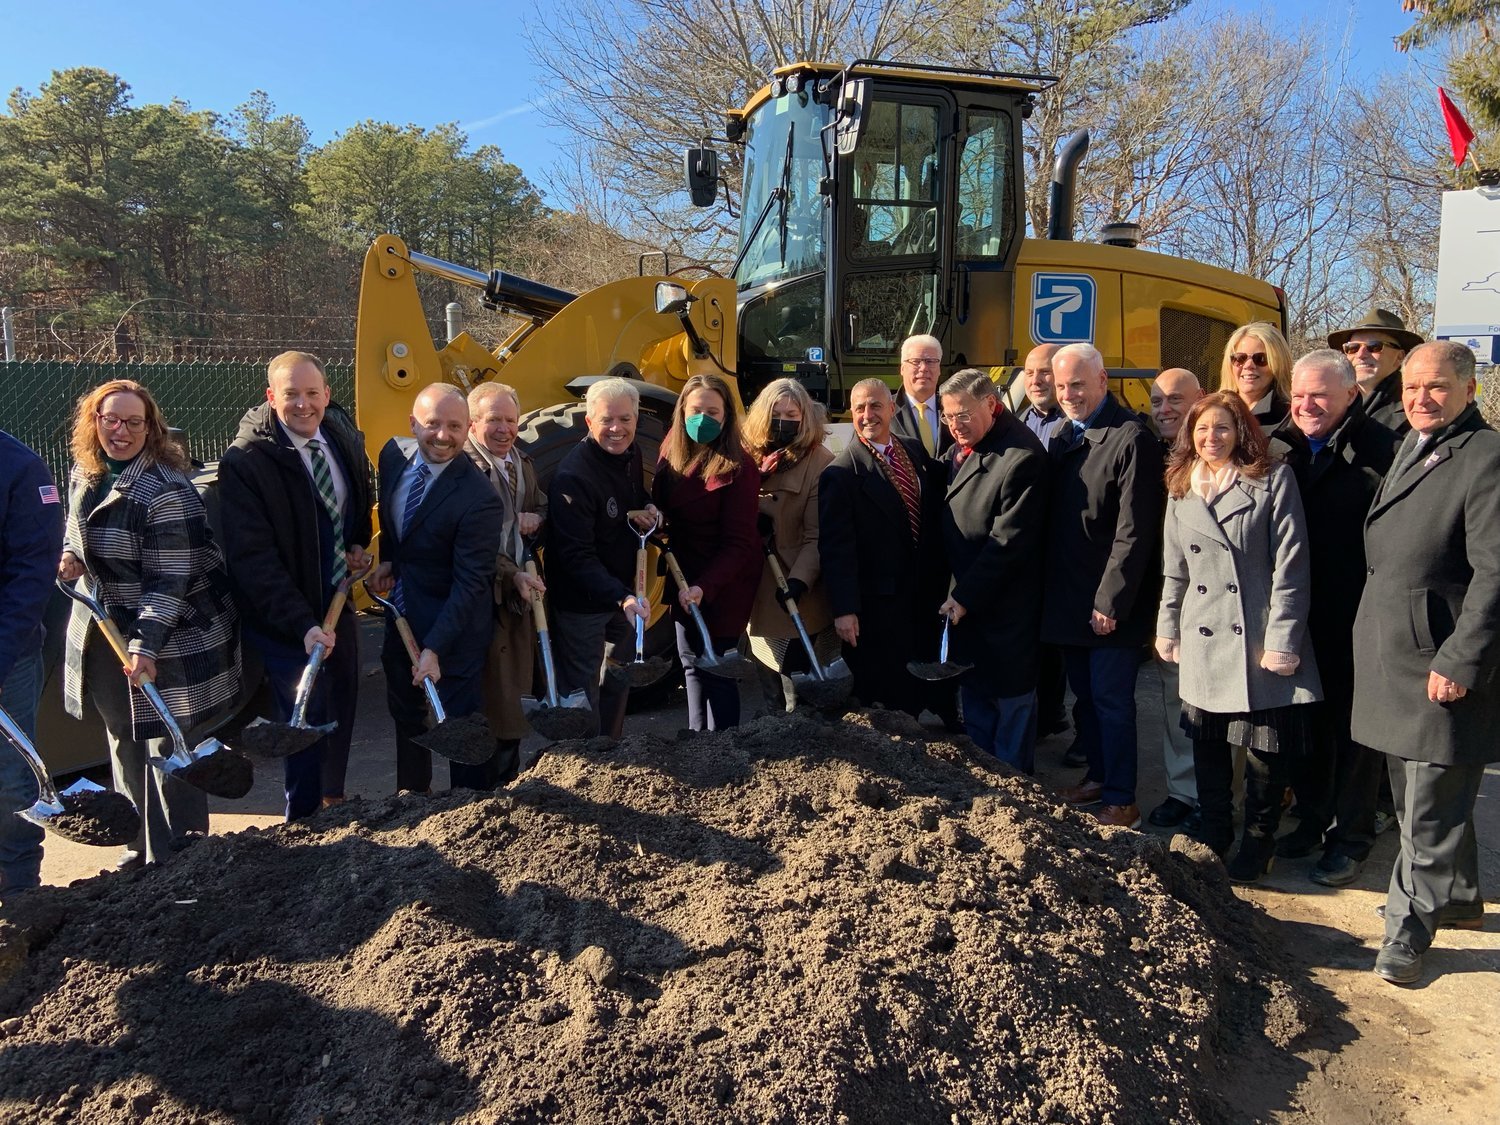 In Jan. 27, 2022, Gov. Kathy Hochul and Suffolk County executive Steve Bellone announced the groundbreaking of the $223.9 million Forge River Watershed Sewer District project, designed to reduce nitrogen loading and improve water quality for homeowners and businesses, located in the Mastic-Shirley area. 